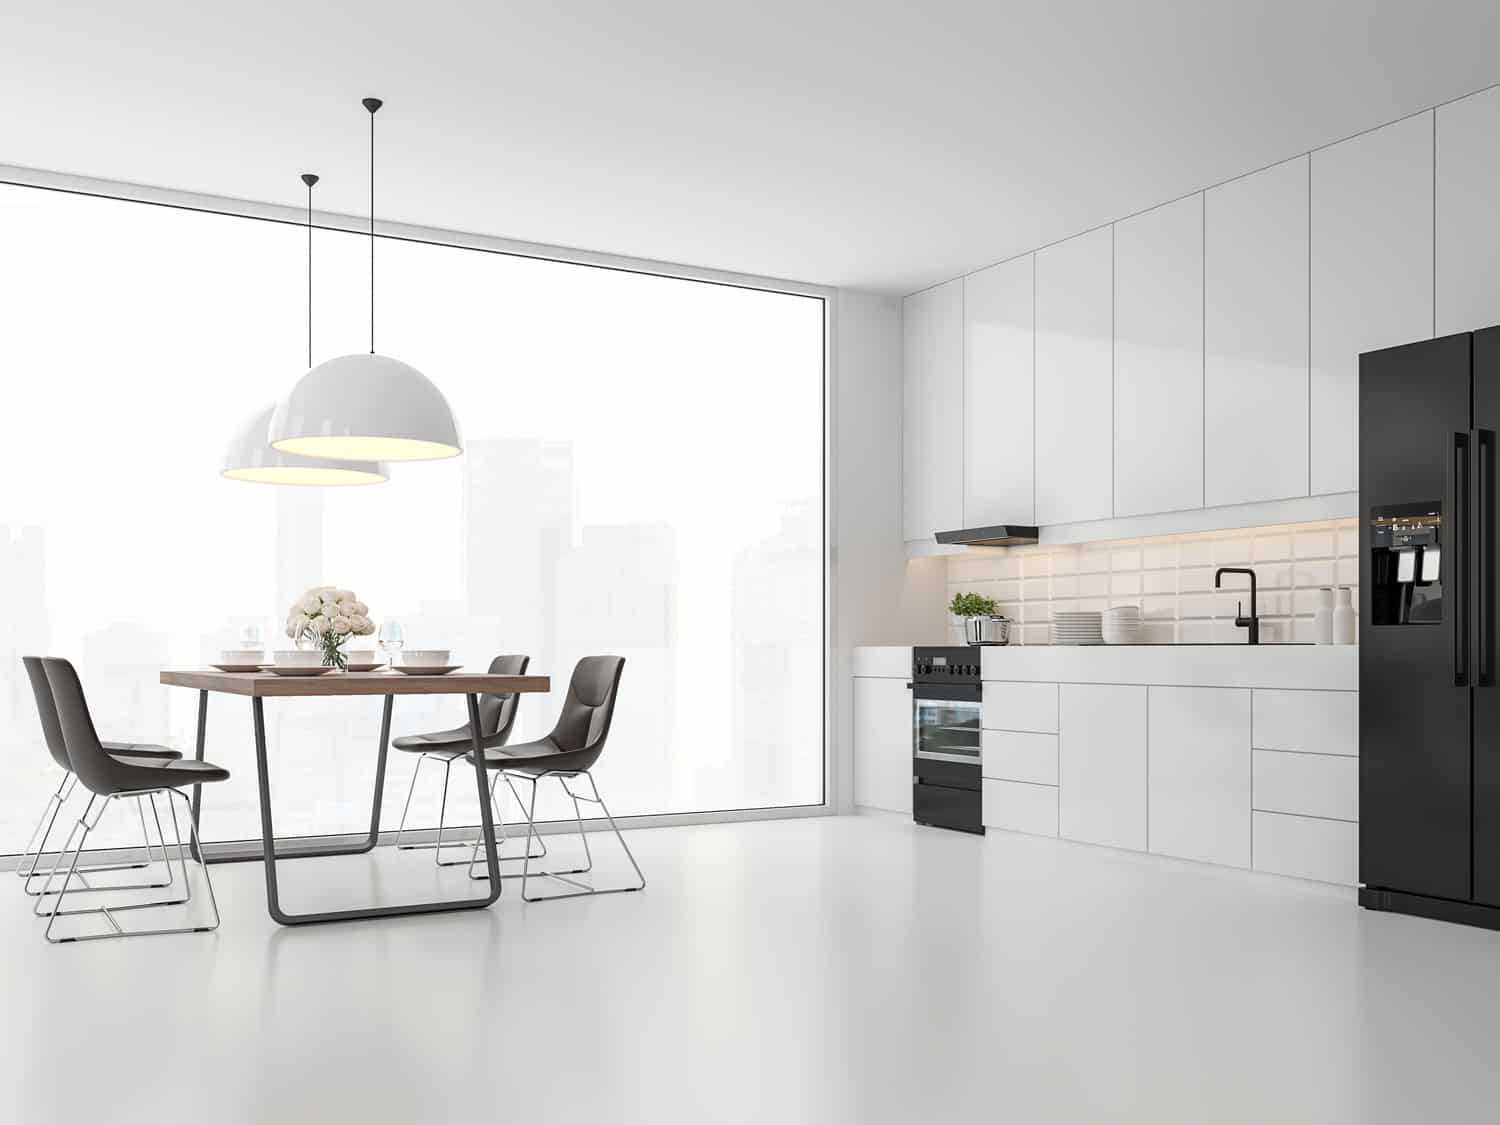 Minimal style kitchen and dining room. There are white floor and wall, Glossy white cabinet doors,Dark brown leather chair,The room has large windows. lookink out to the city view.